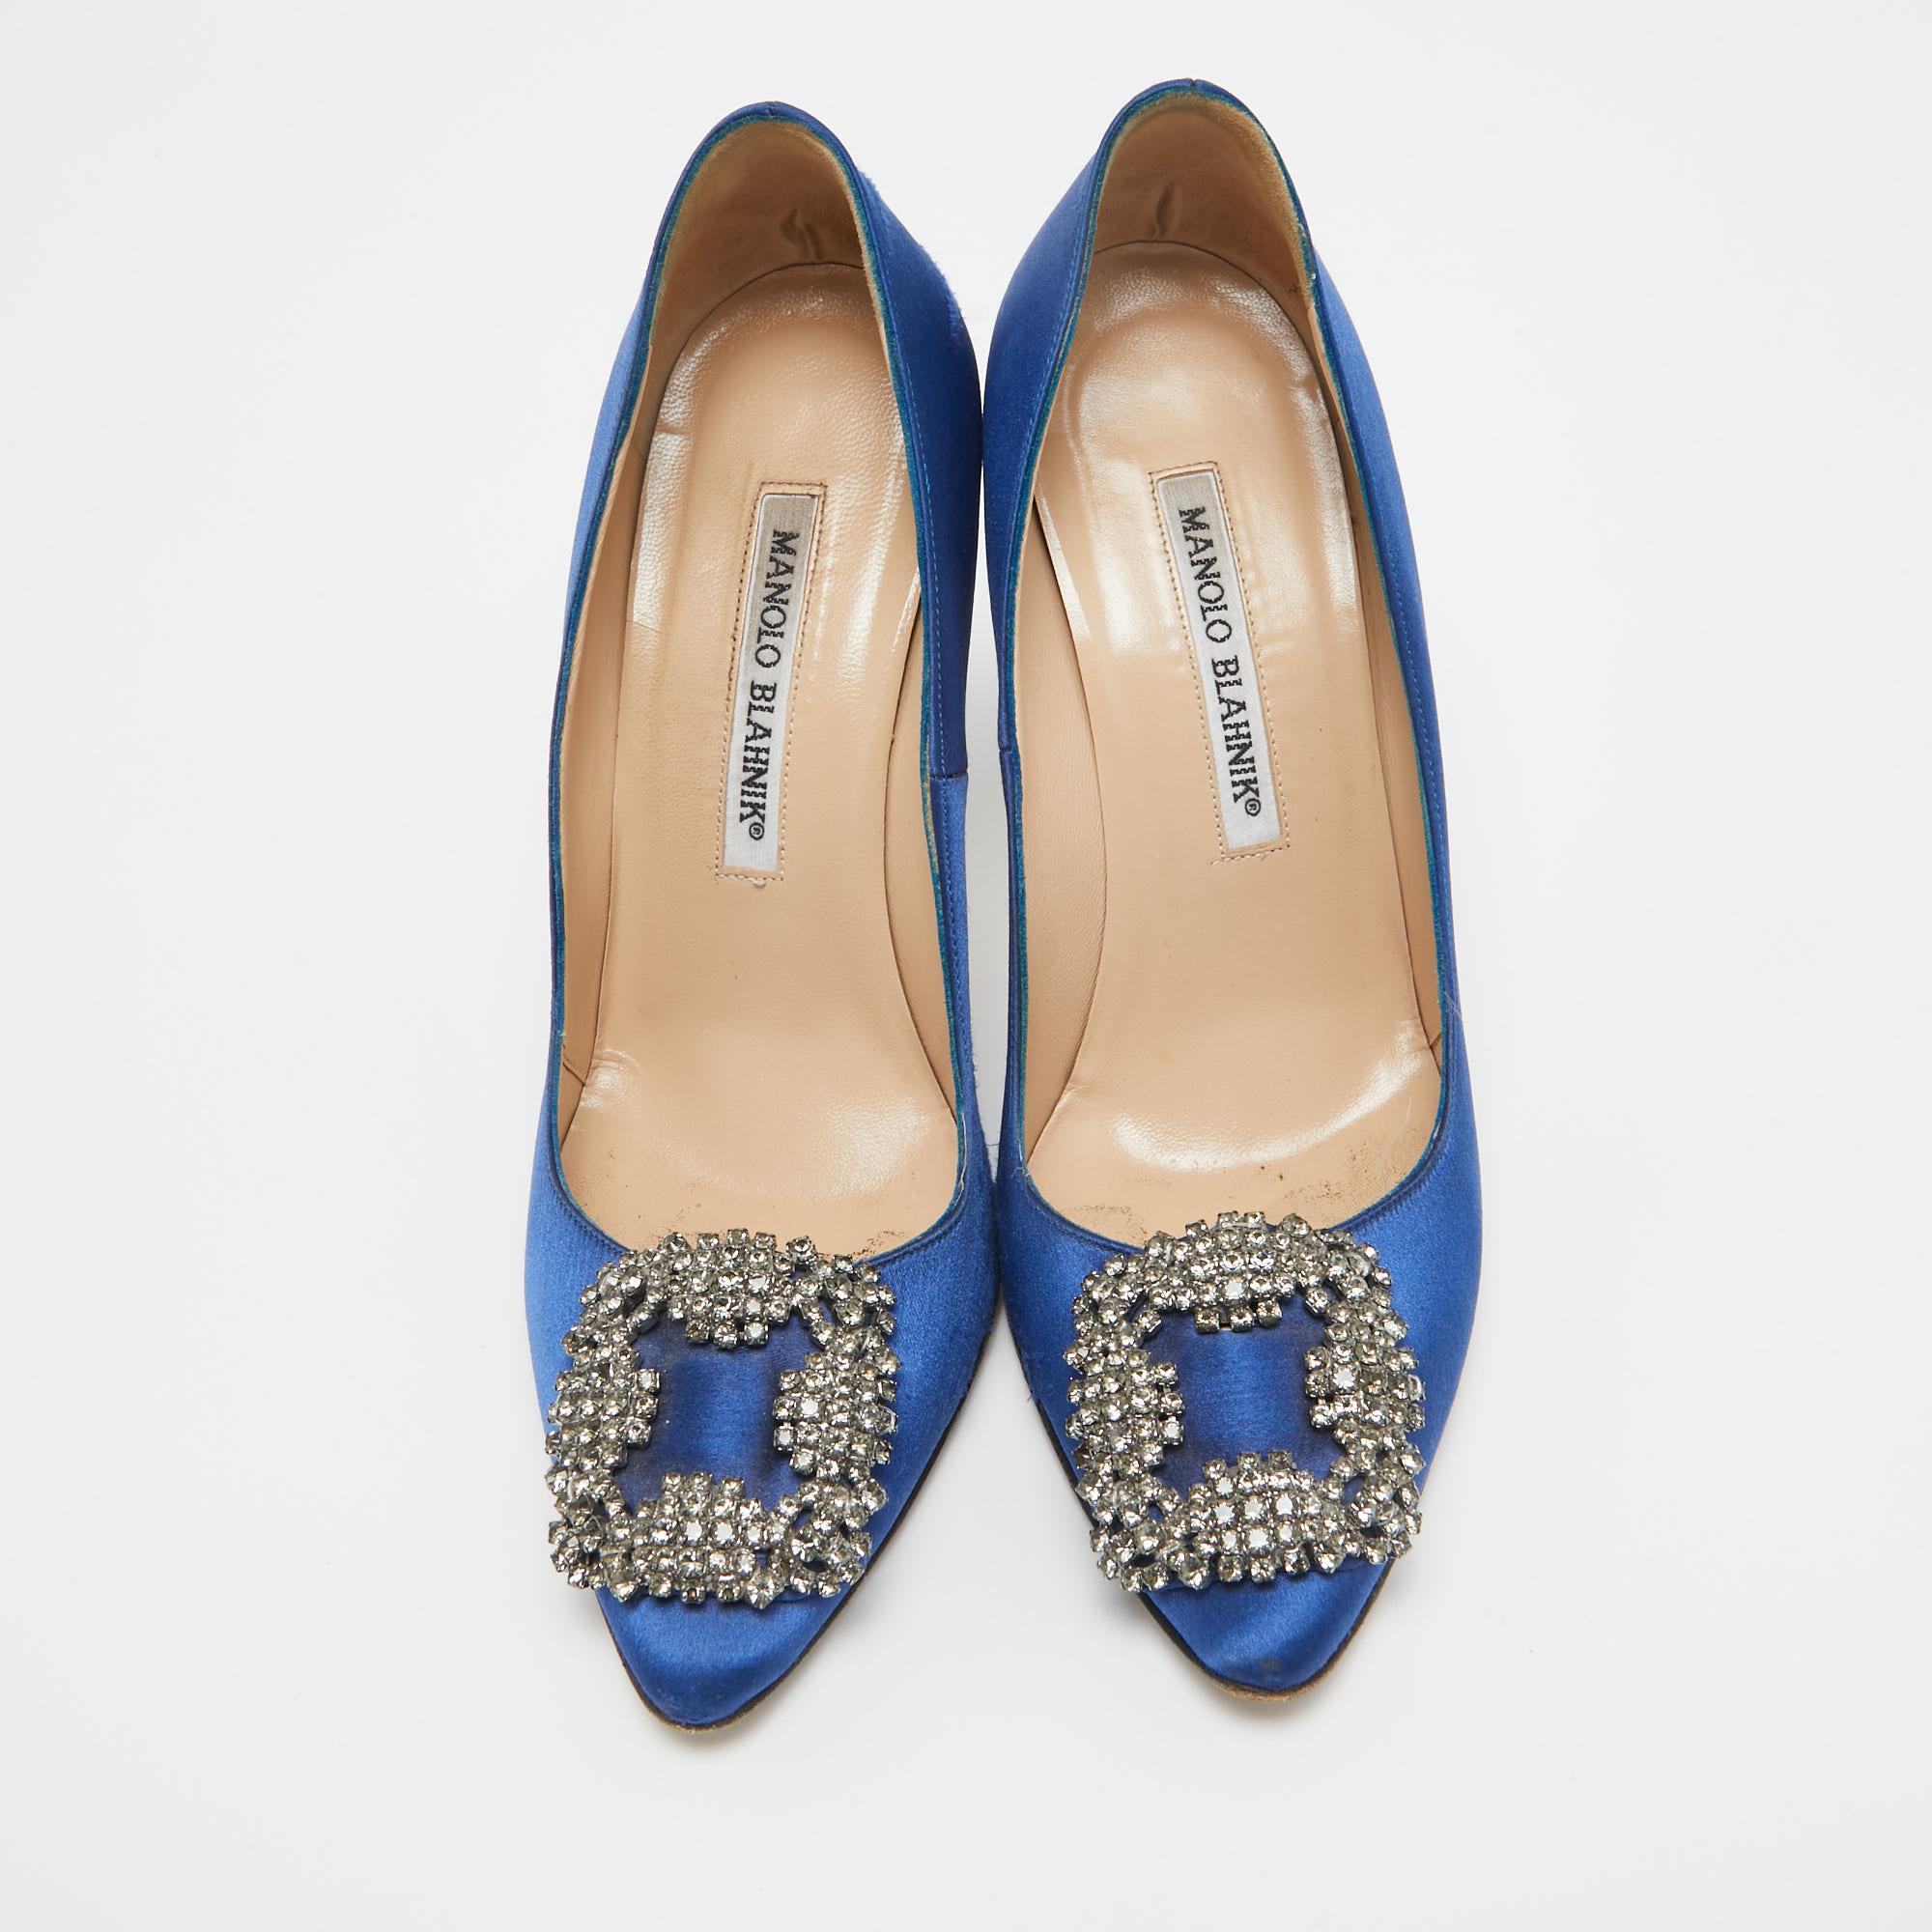 Complement your well-put-together outfit with these authentic Manolo Blahnik blue shoes. Timeless and classy, they have an amazing construction for enduring quality and comfortable fit.

